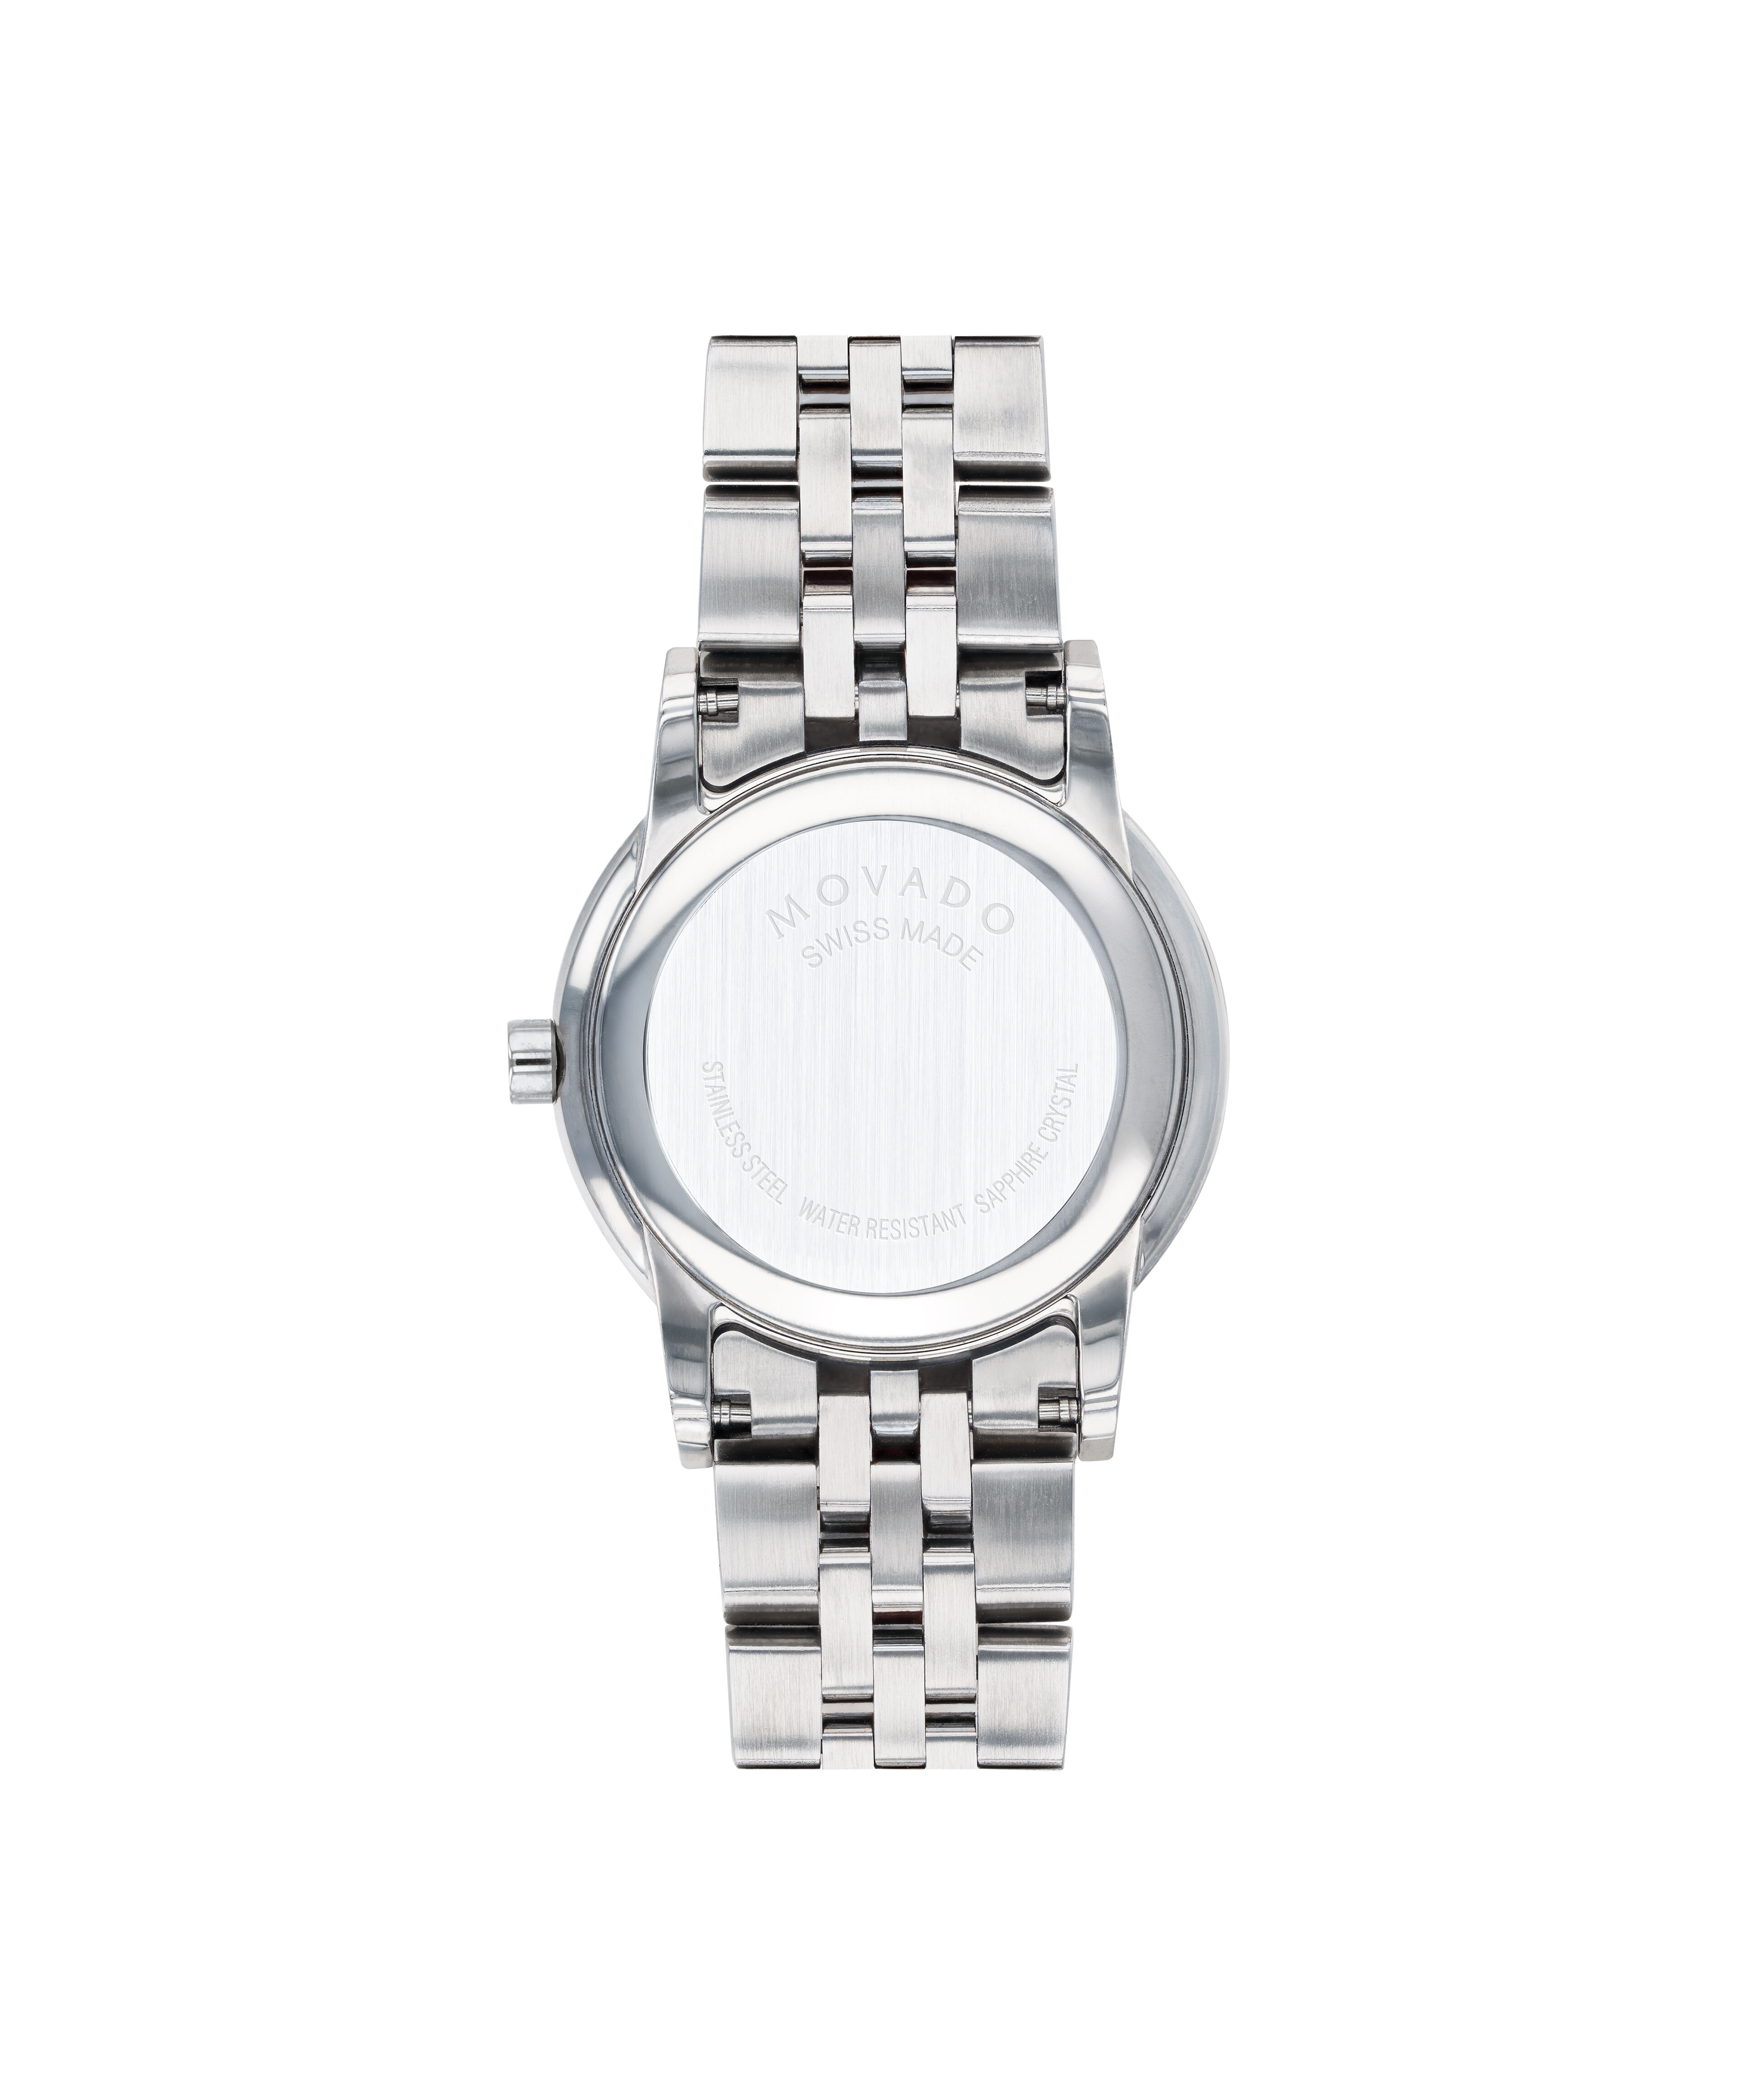 Movado Museum Classic White Dial 35 mm. Ref. 87 A2 864